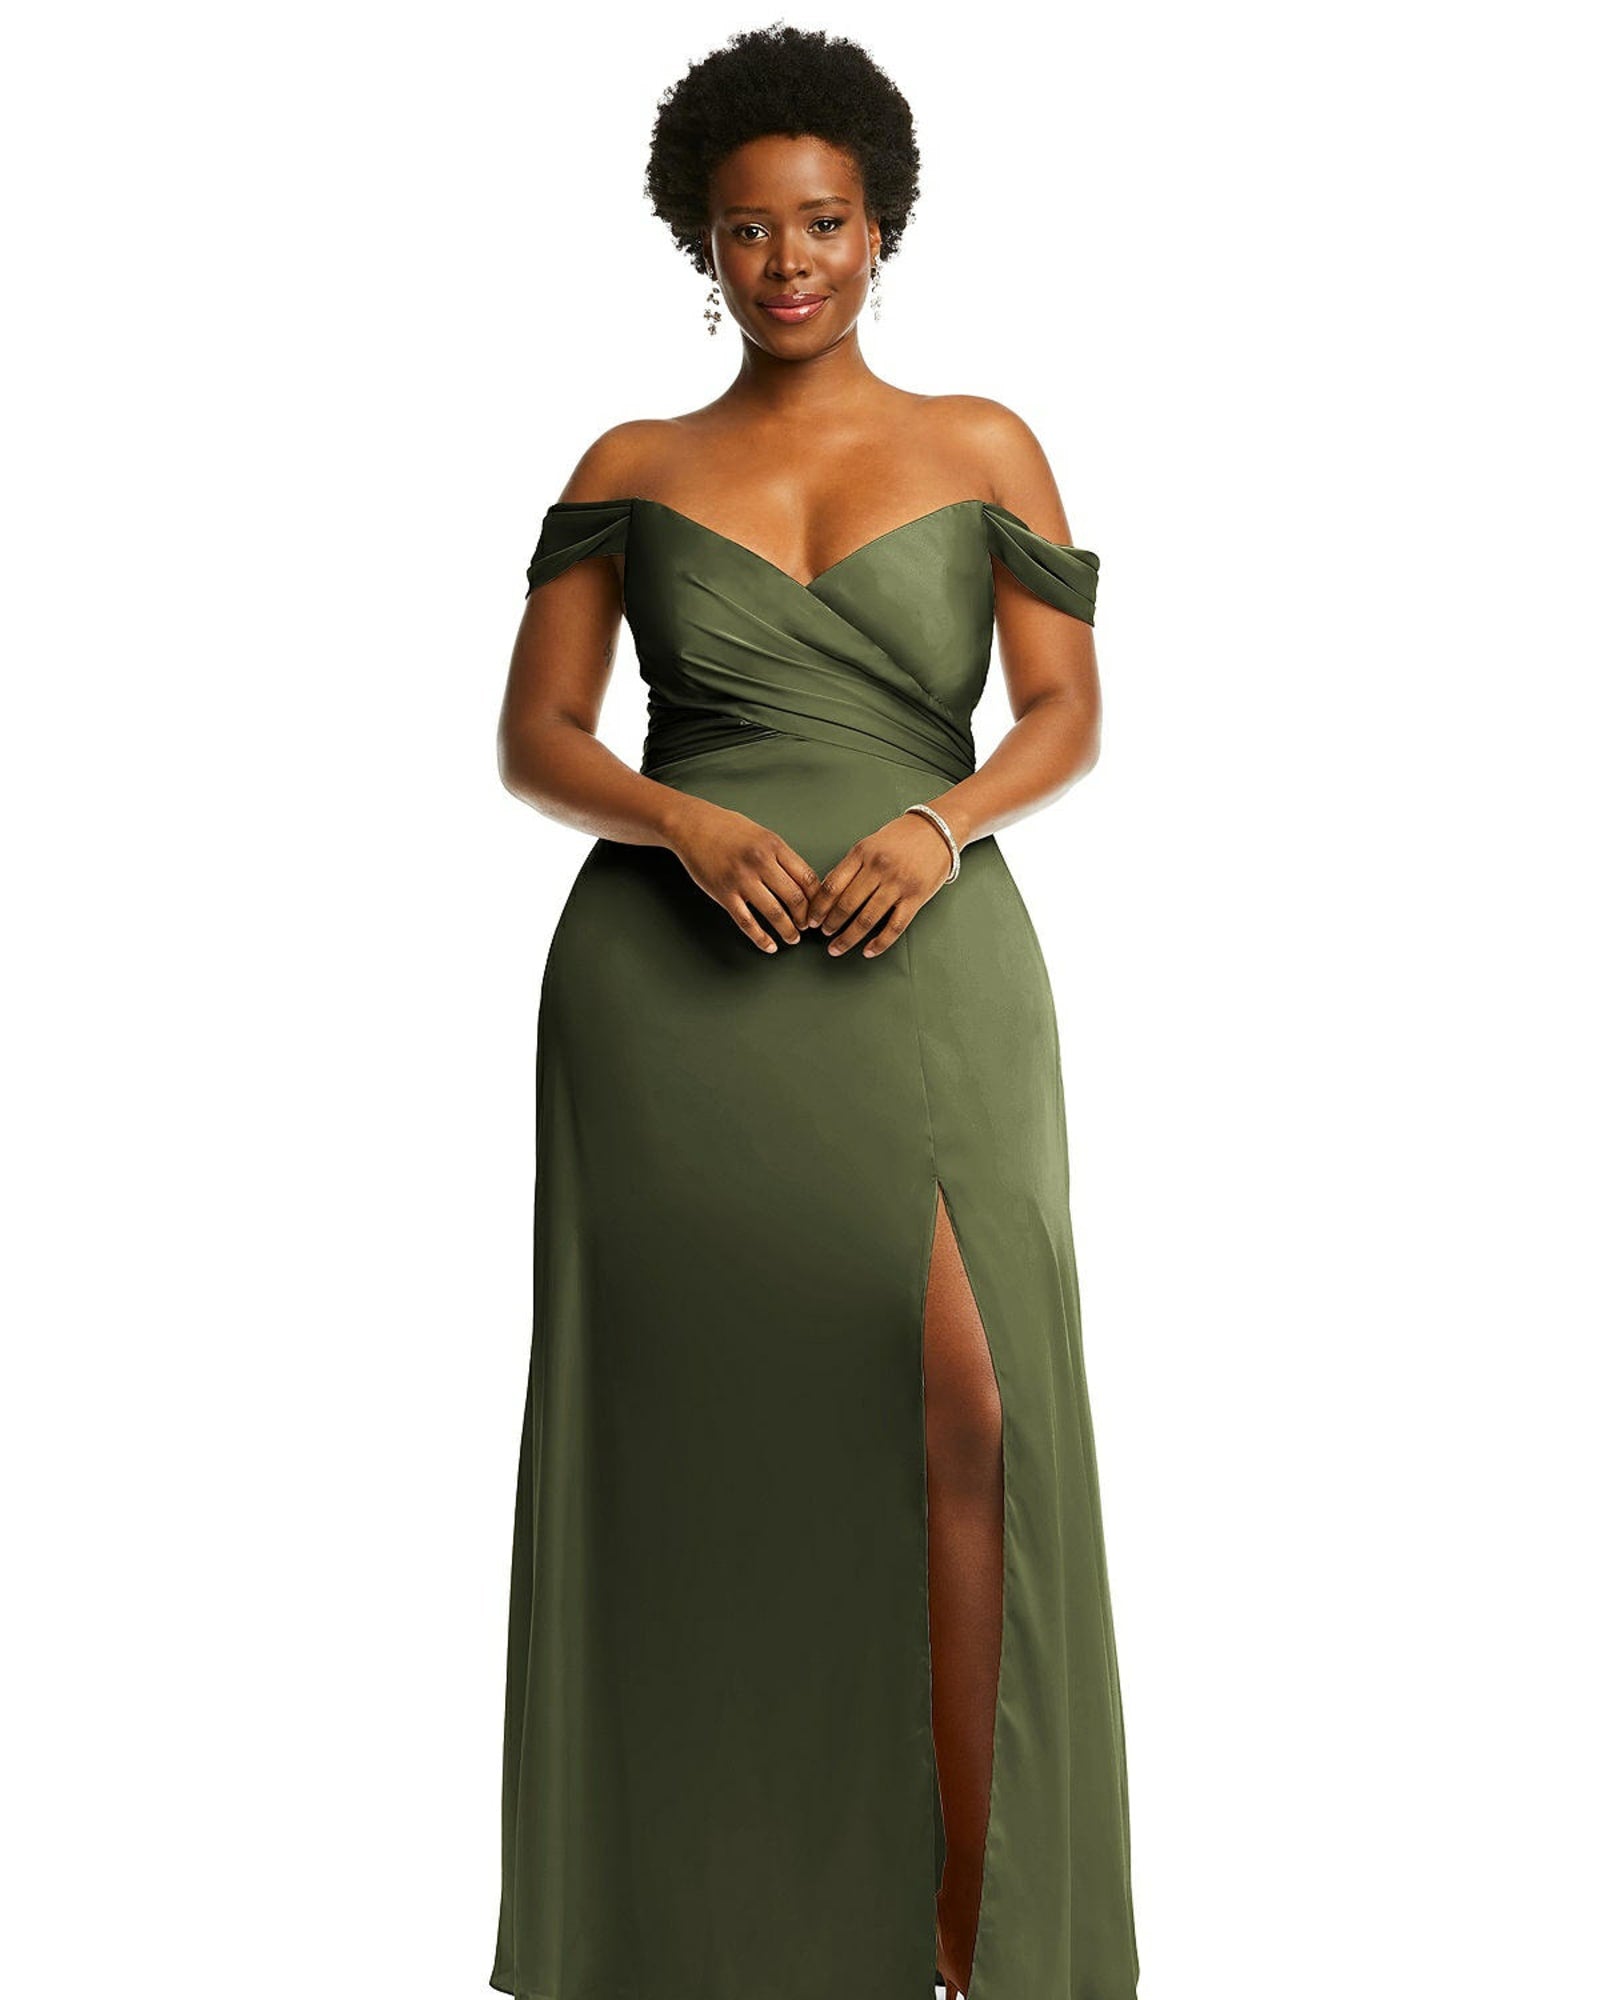 Women's Olive Cotton Solid Bodycon Dress